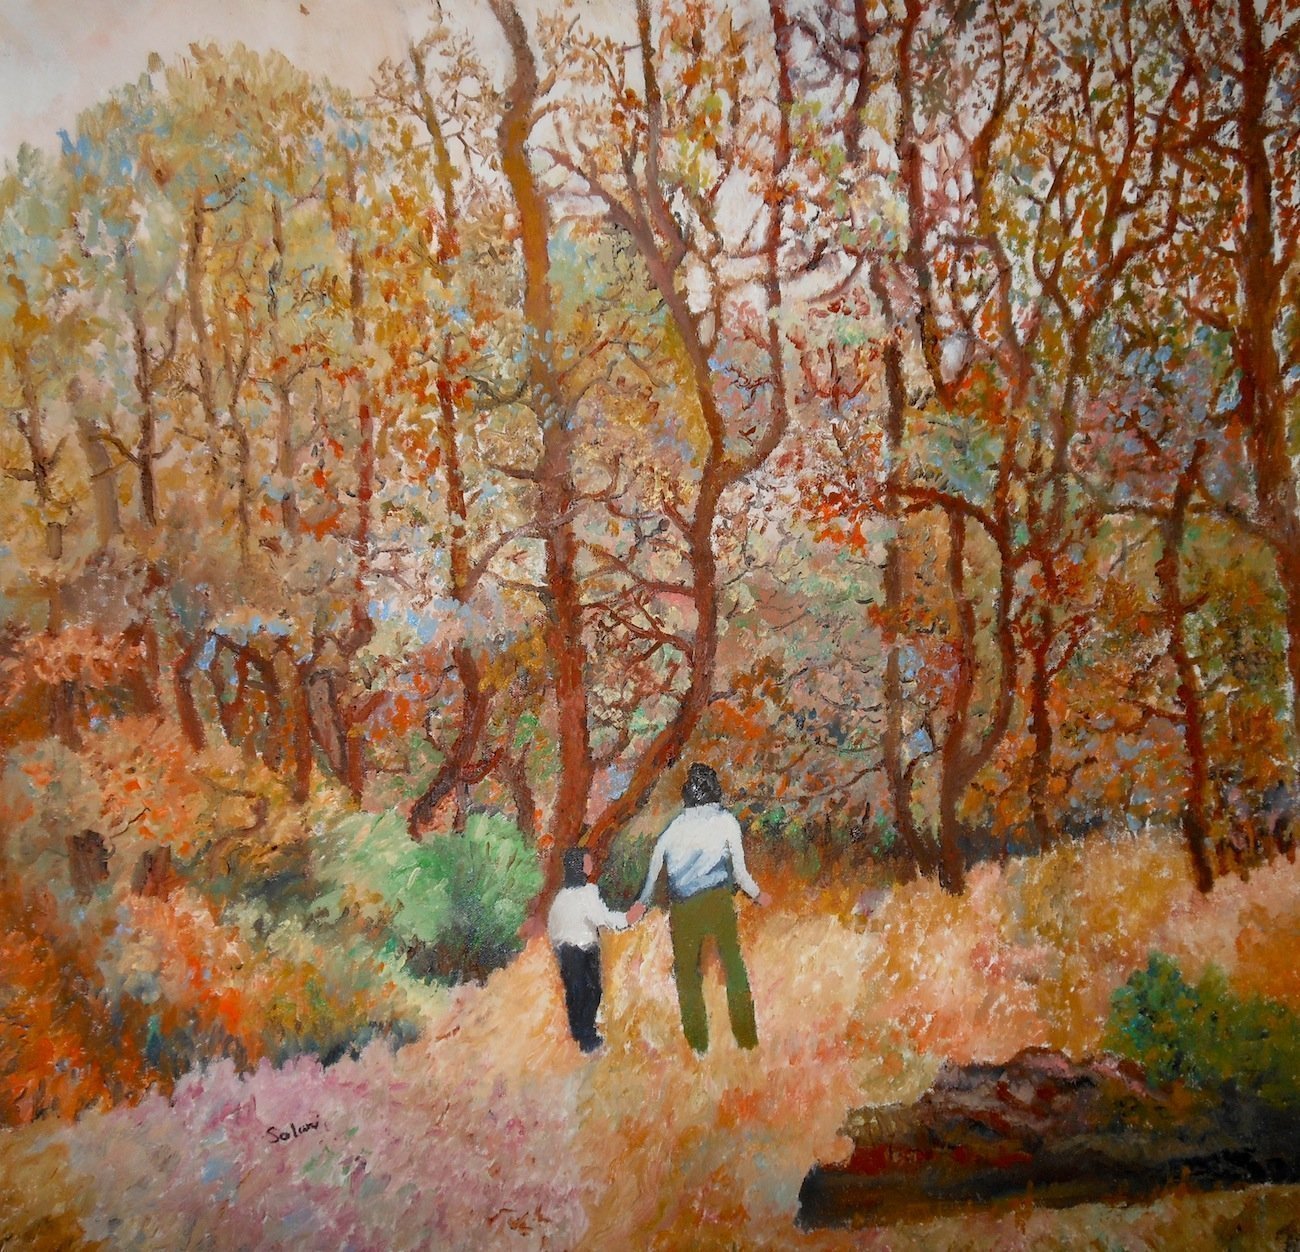 Robert Solari; A Walk In The Woods, 2018, Original Painting Oil, 28 x 30 inches. Artwork description: 241 This painting represents a mother and daughter enjoying the wonders of nature...